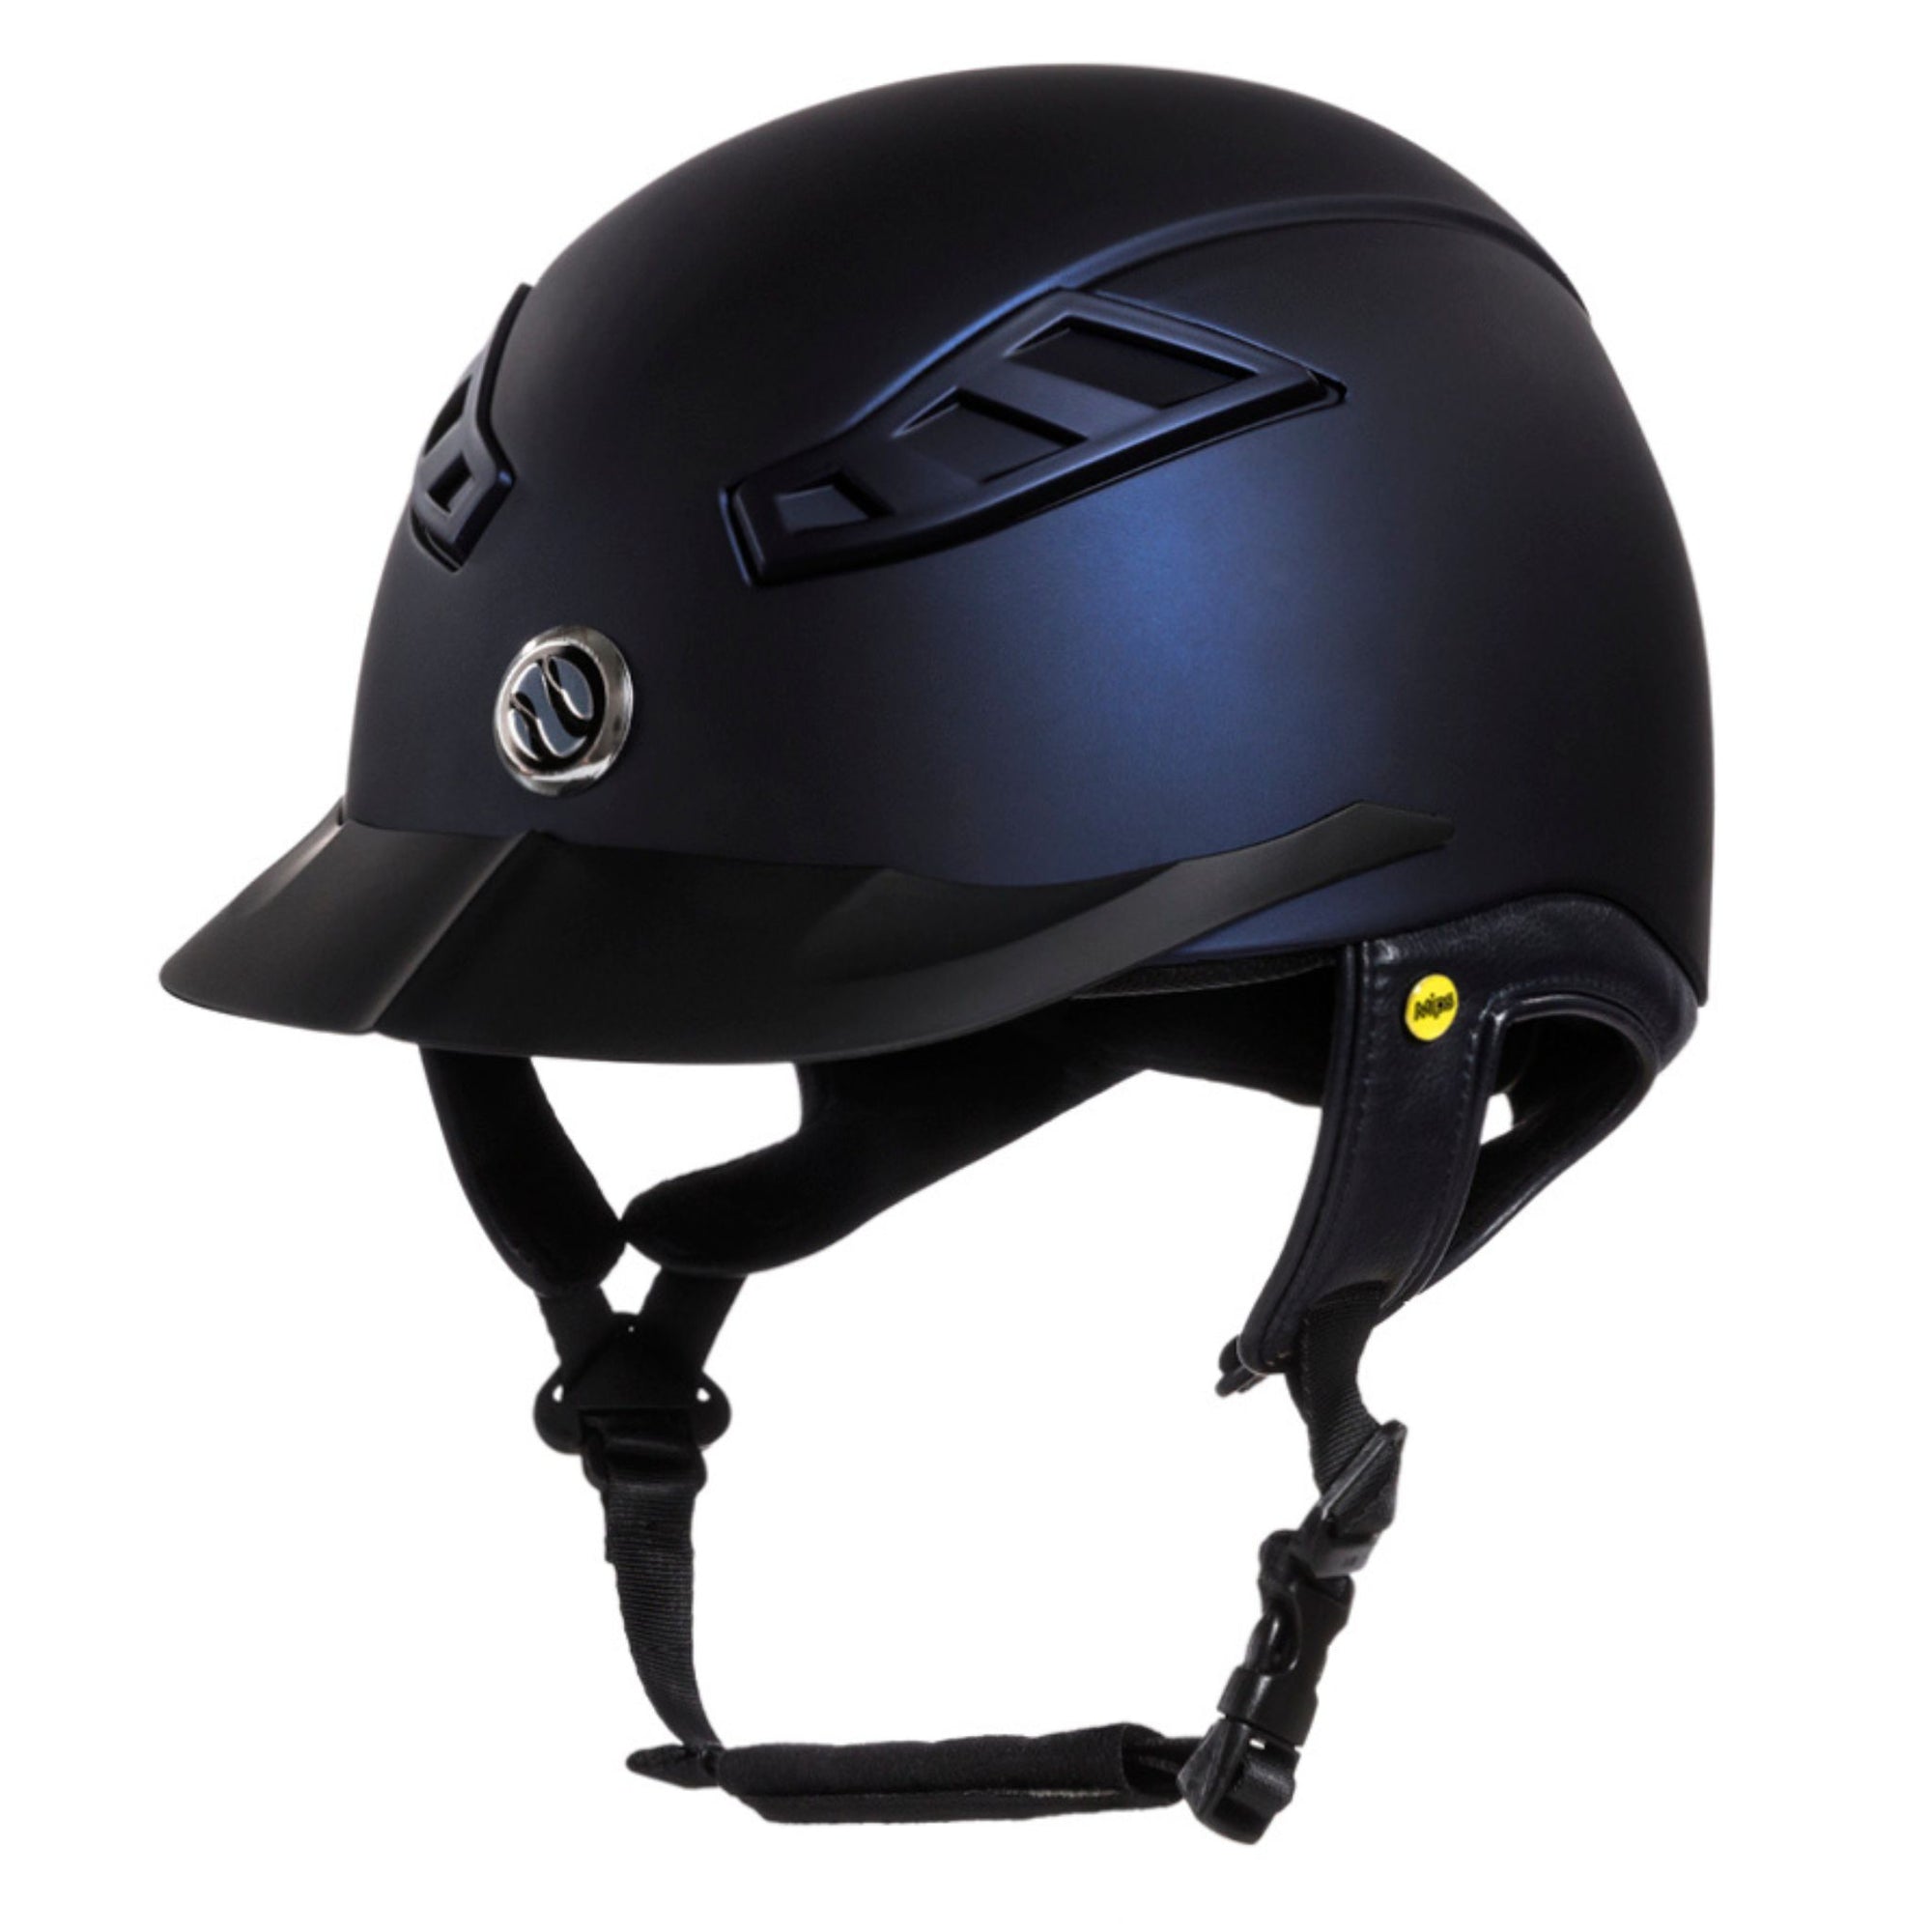 Black helmet with leather ear straps and durable plastic brim.